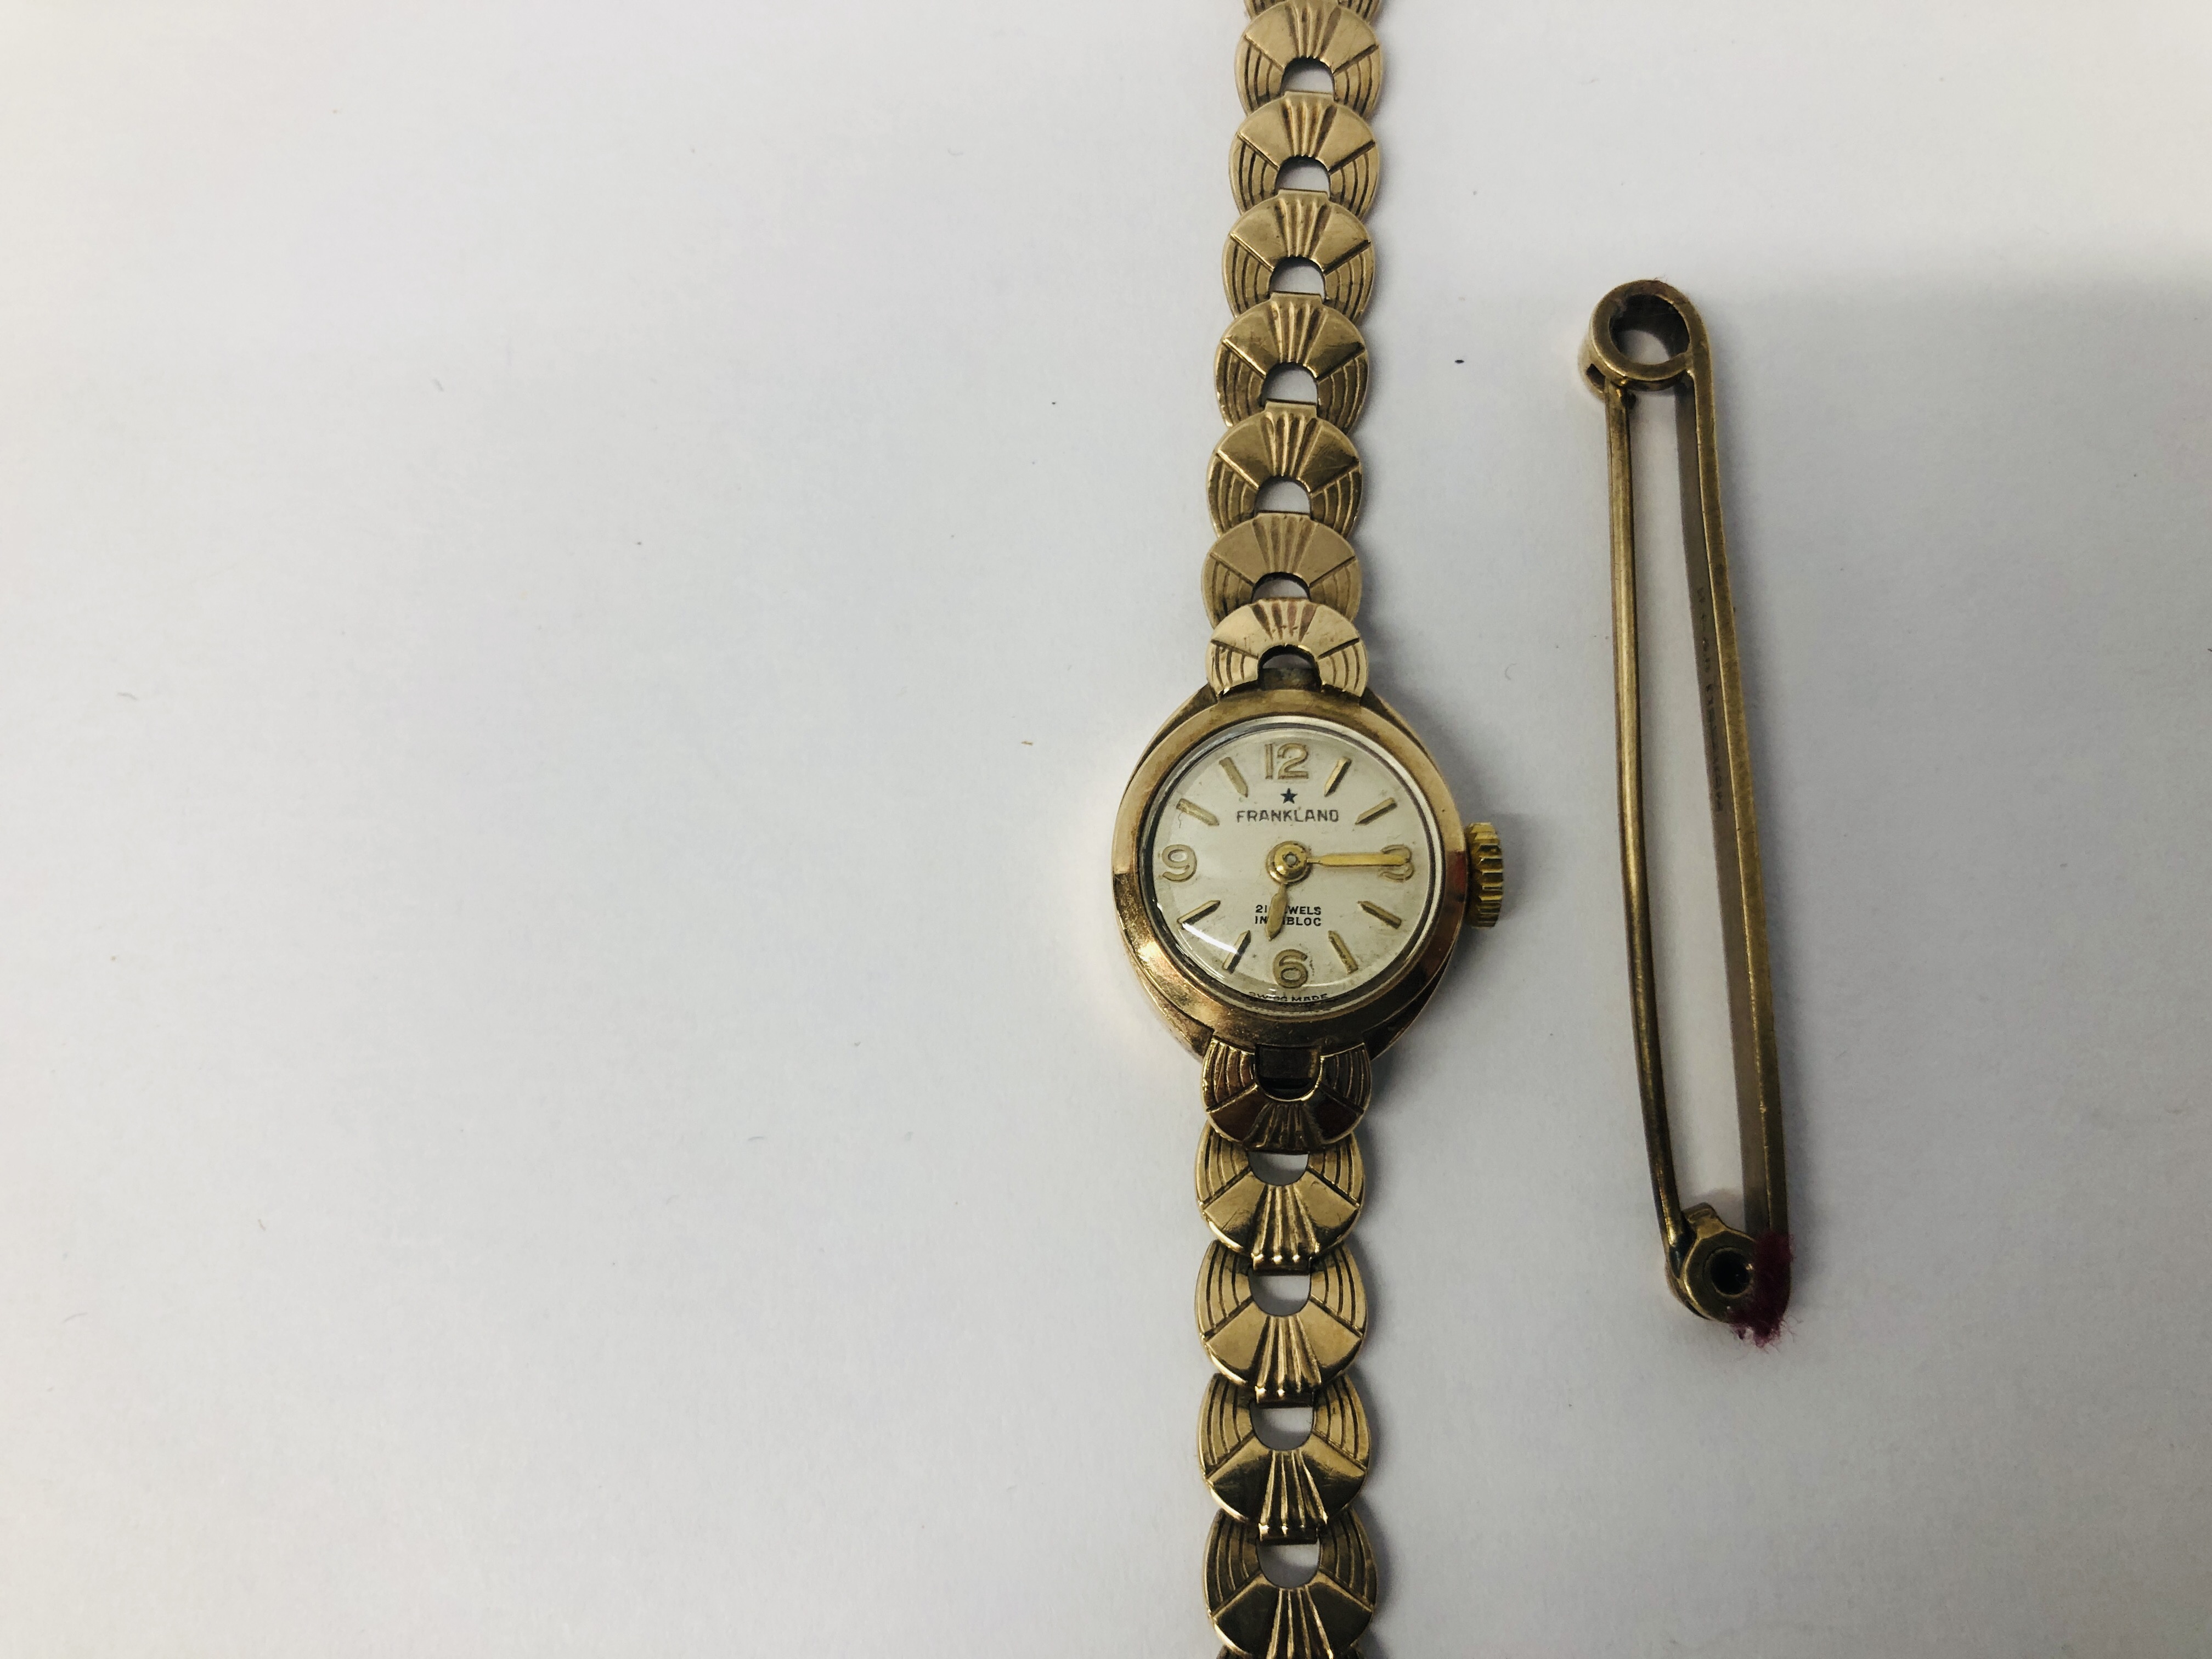 A LADIES 9CT GOLD CASED FRANKLAND WRIST WATCH ON 9CT GOLD BRACELET STRAP ALONG WITH A 9CT GOLD BAR - Image 2 of 14